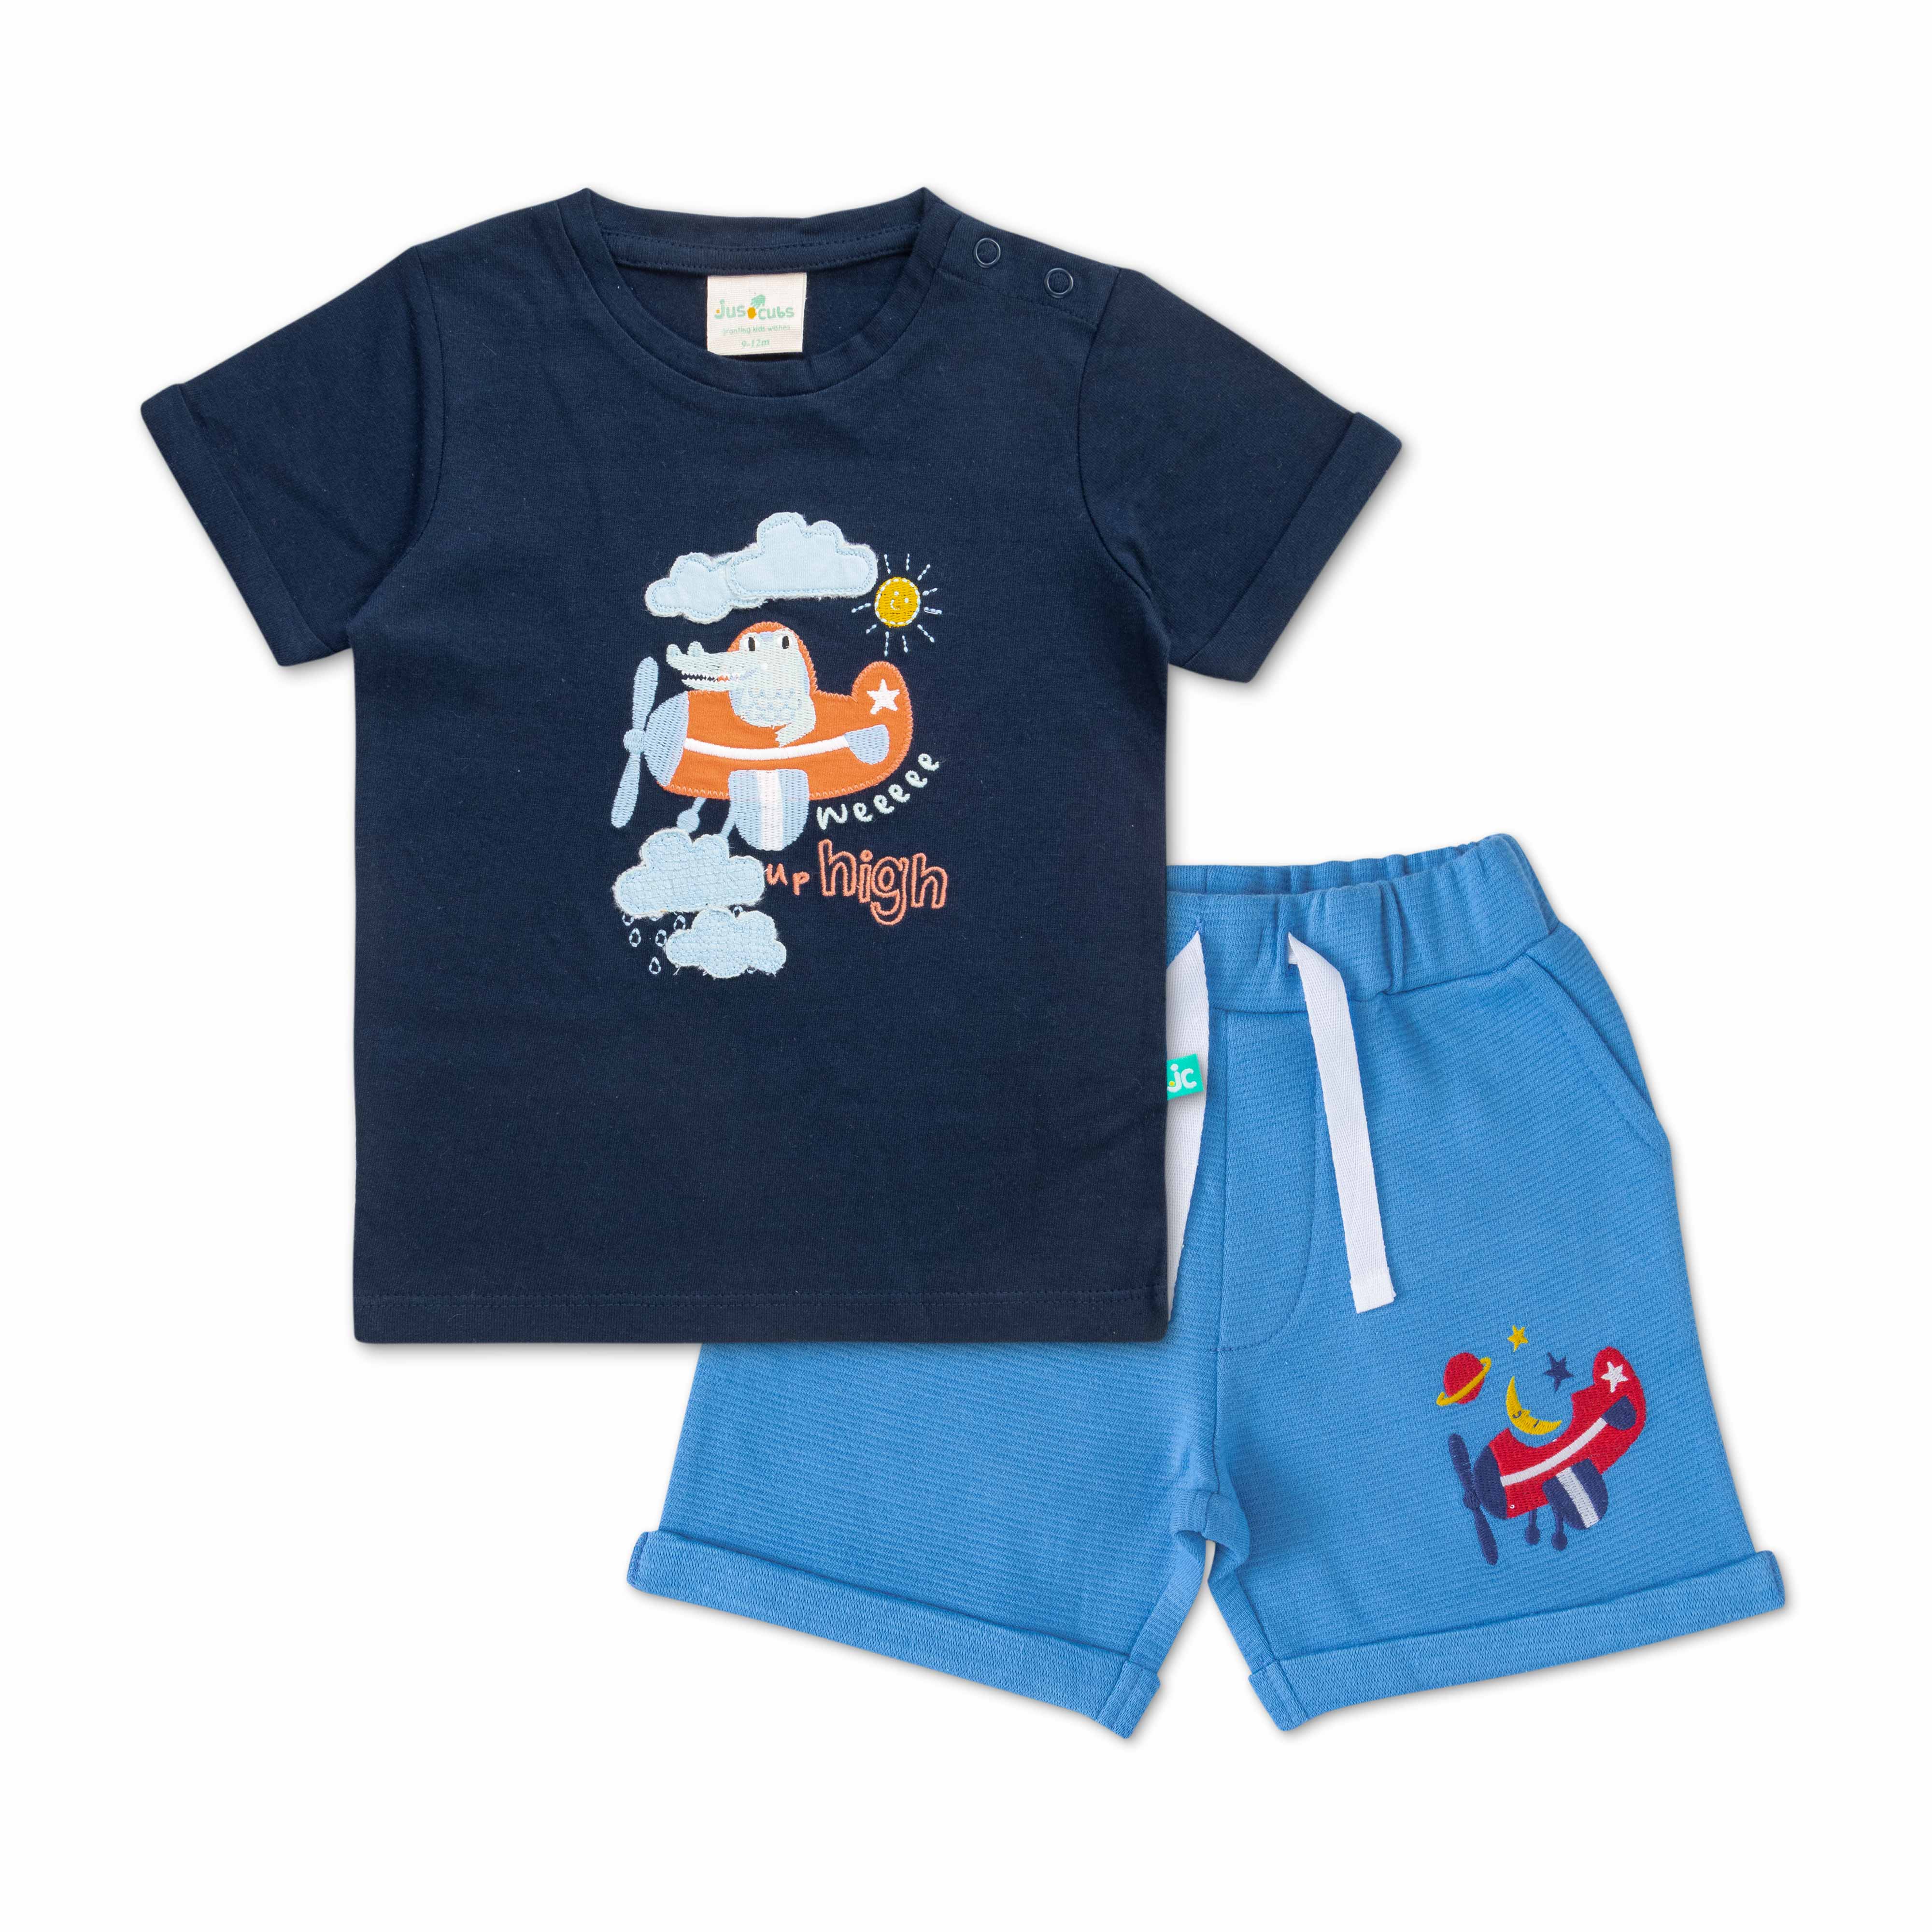 Infant Boys Striped Pure Cotton T-shirt with Shorts- Blue